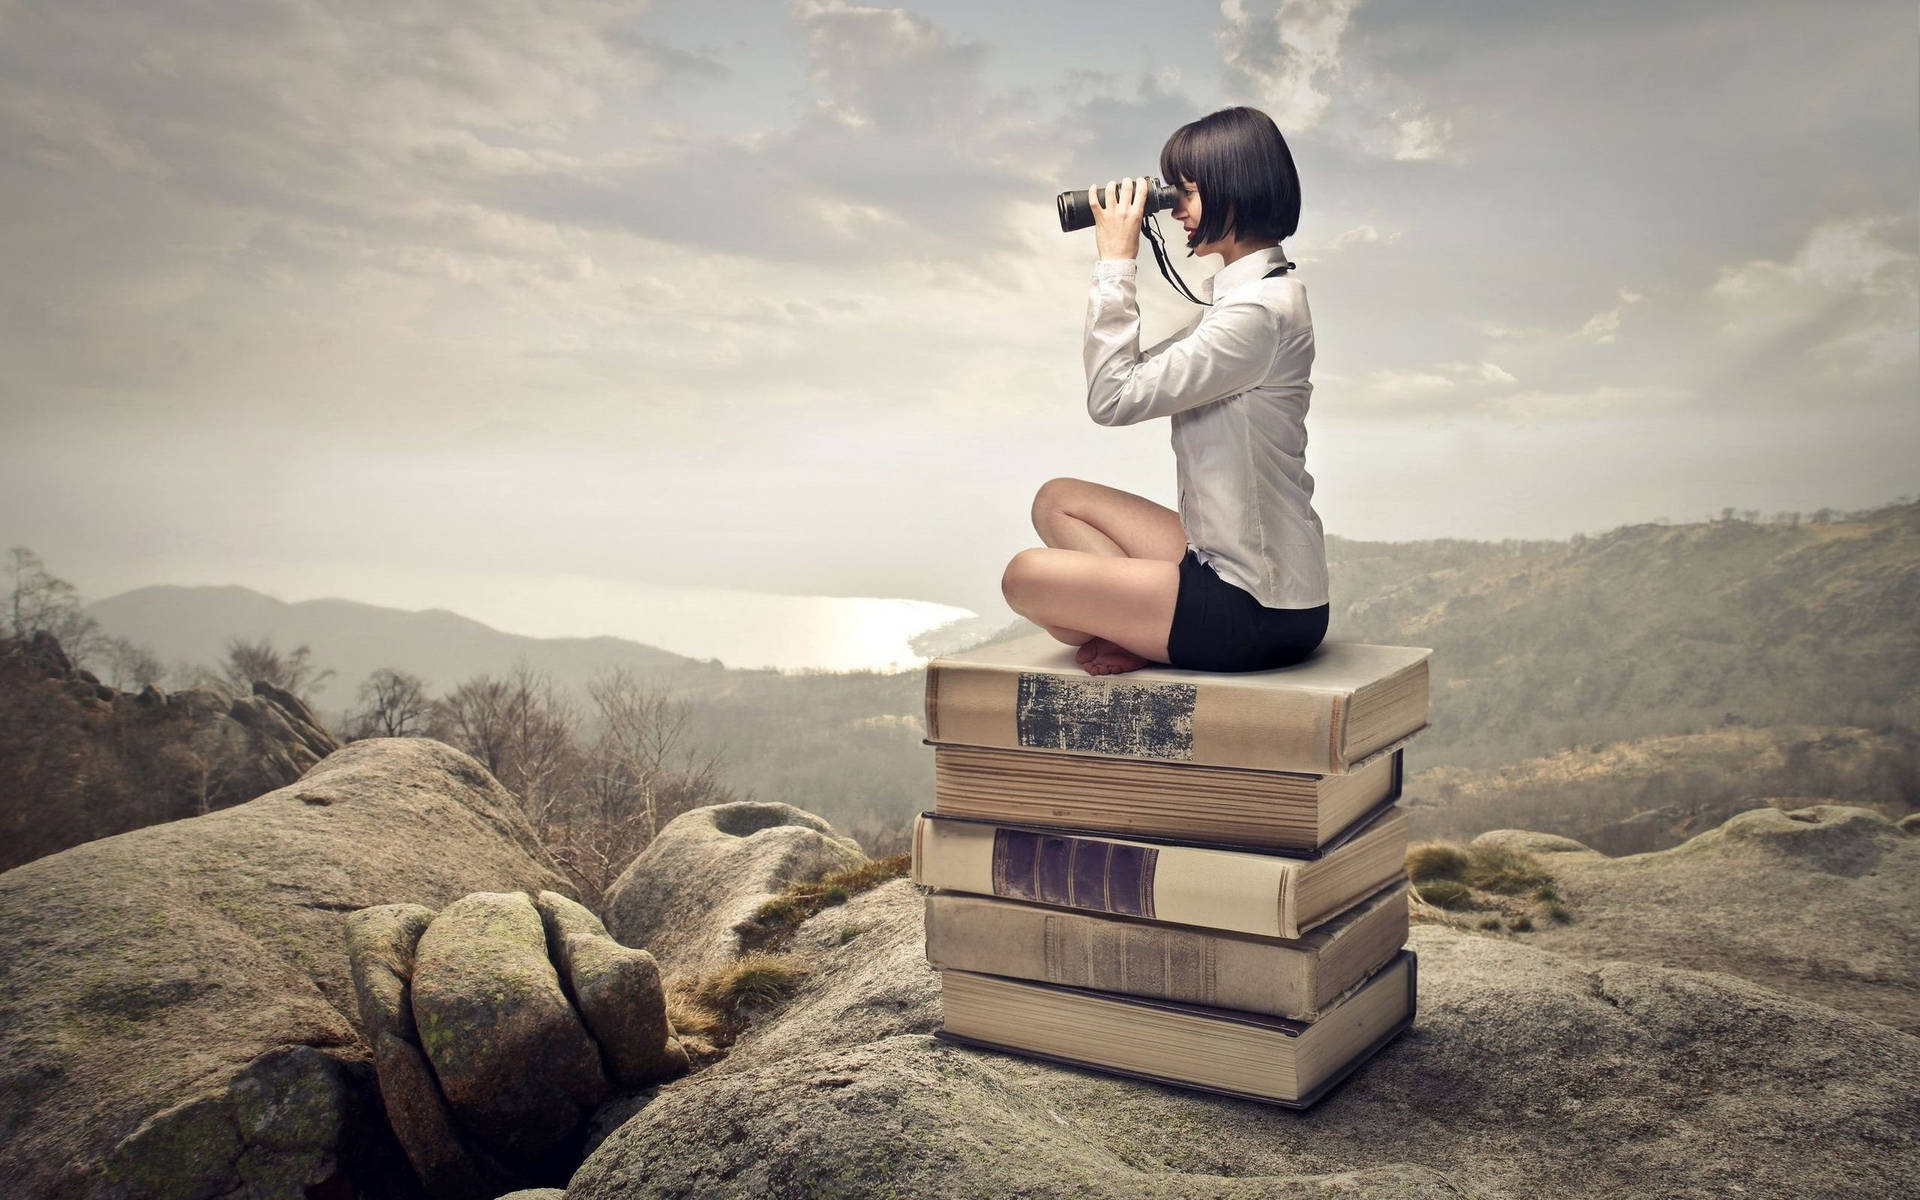 Digital Art Of A Girl With Telescope Seated On Books